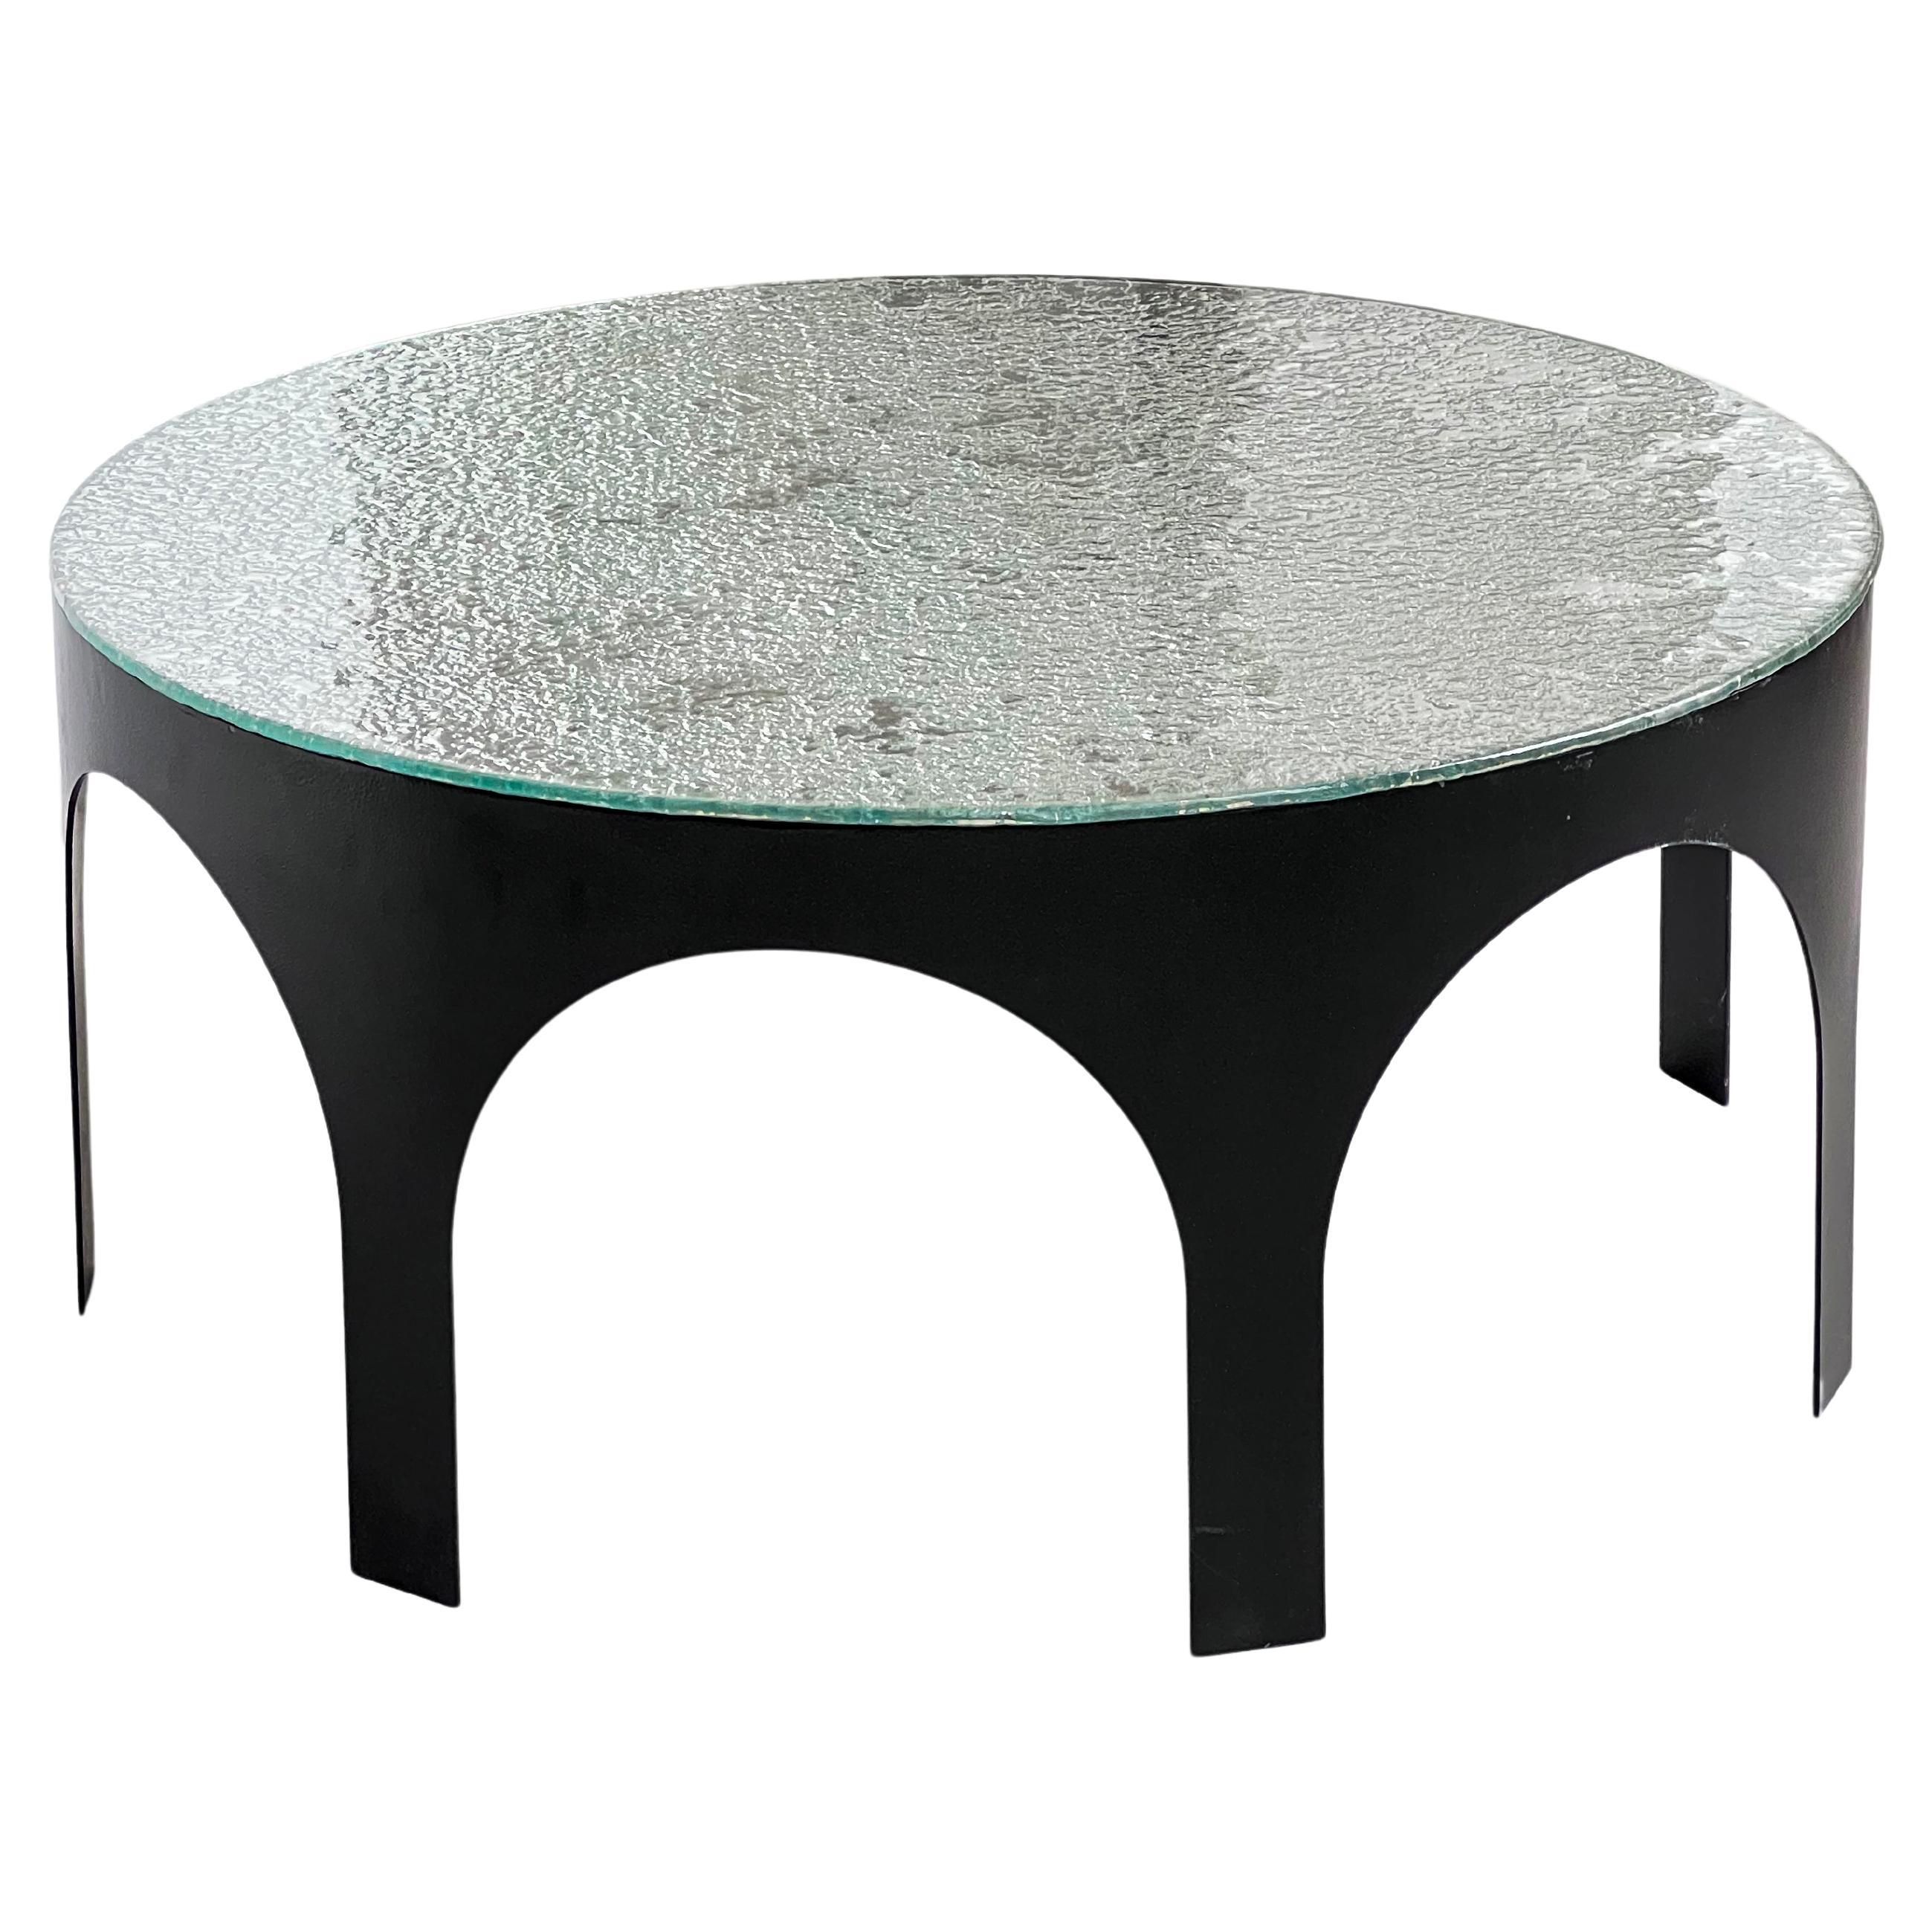 Sculptural Coffee Table with Lunar Mirror Top, One-Off Collectible Design